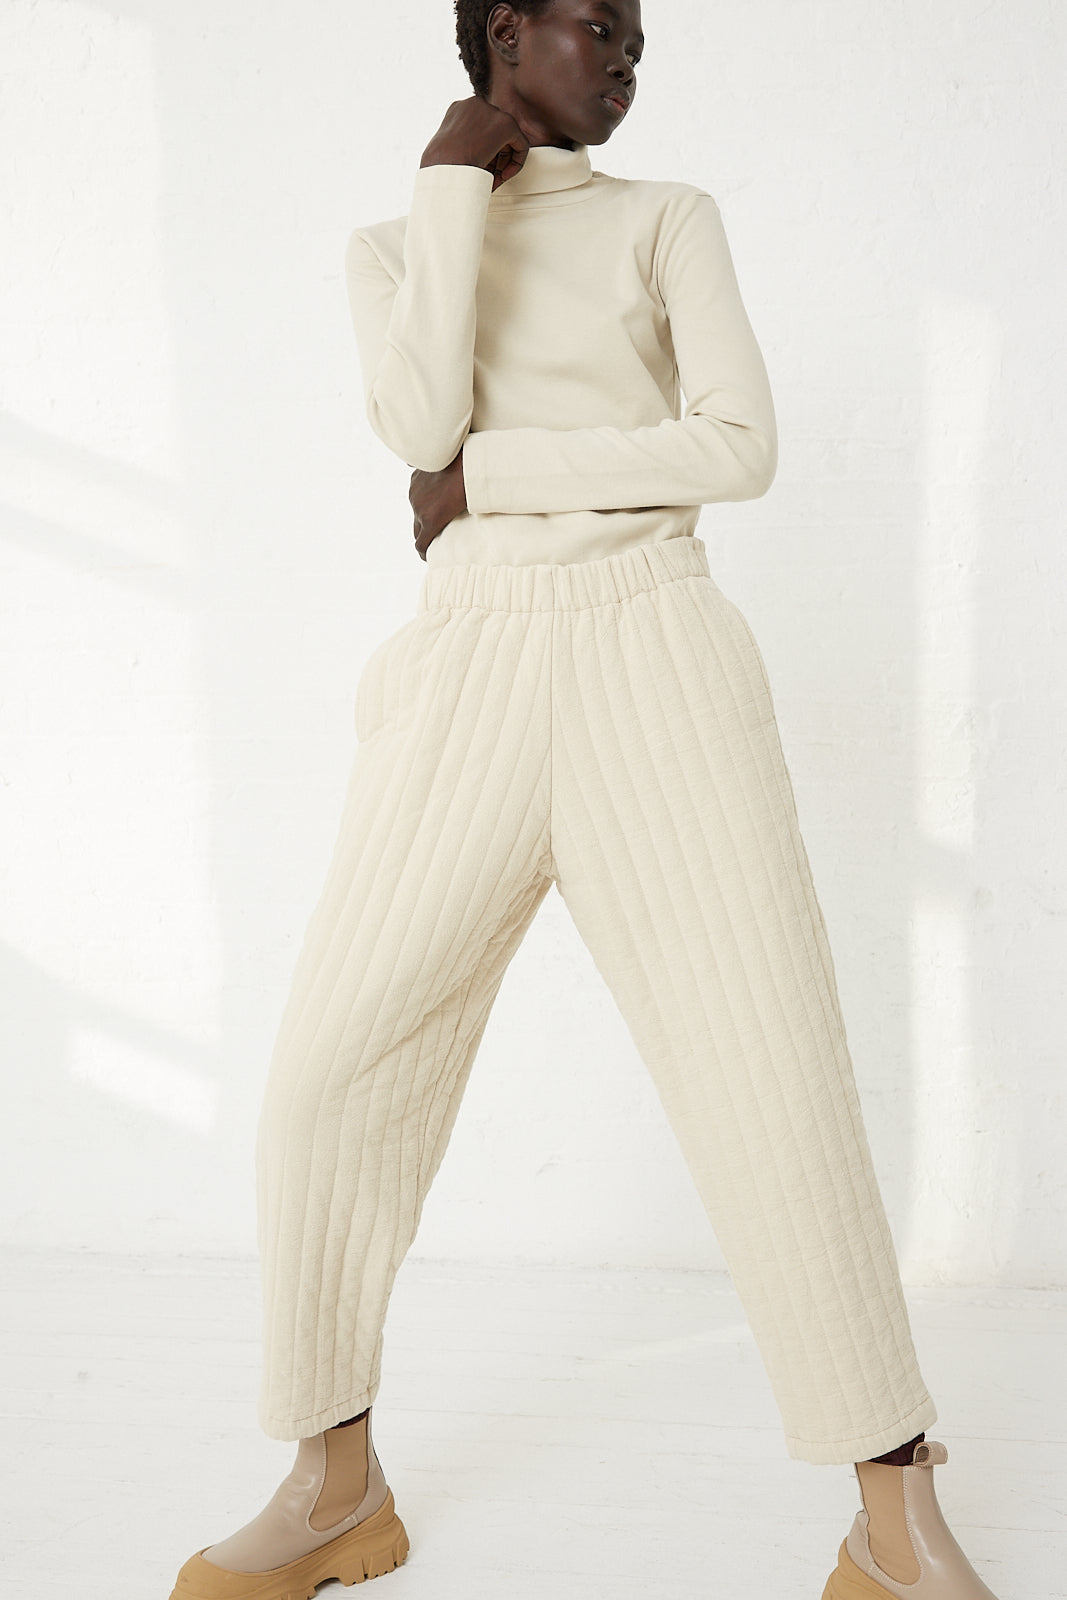 The model is wearing an ivory turtleneck and a pair of Black Crane Quilted Easy Pants in Ivory.